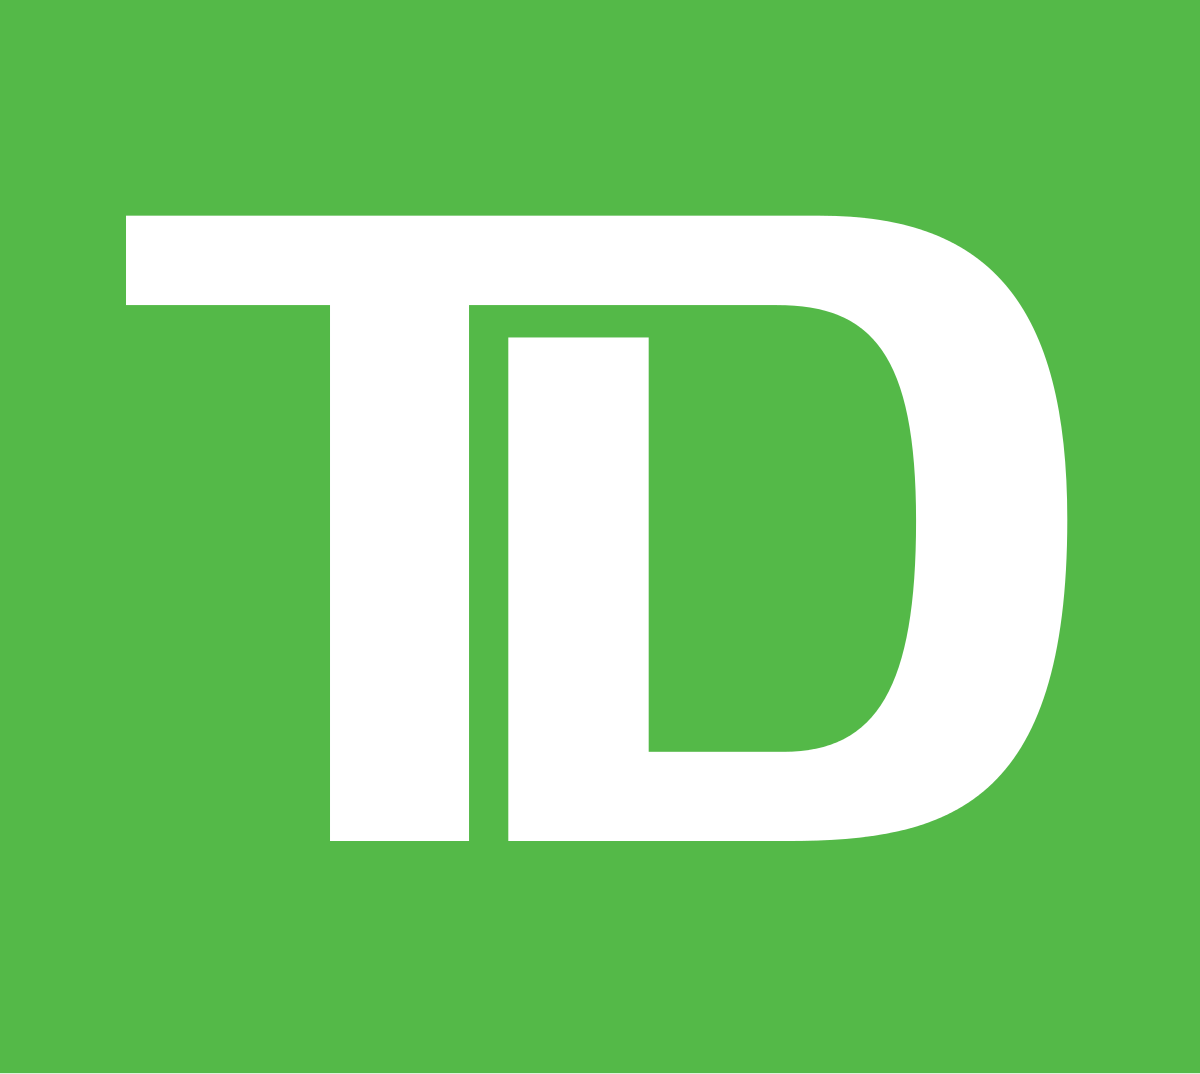 Learn How to Sign Up - TD Bank Rewards Credit Cards